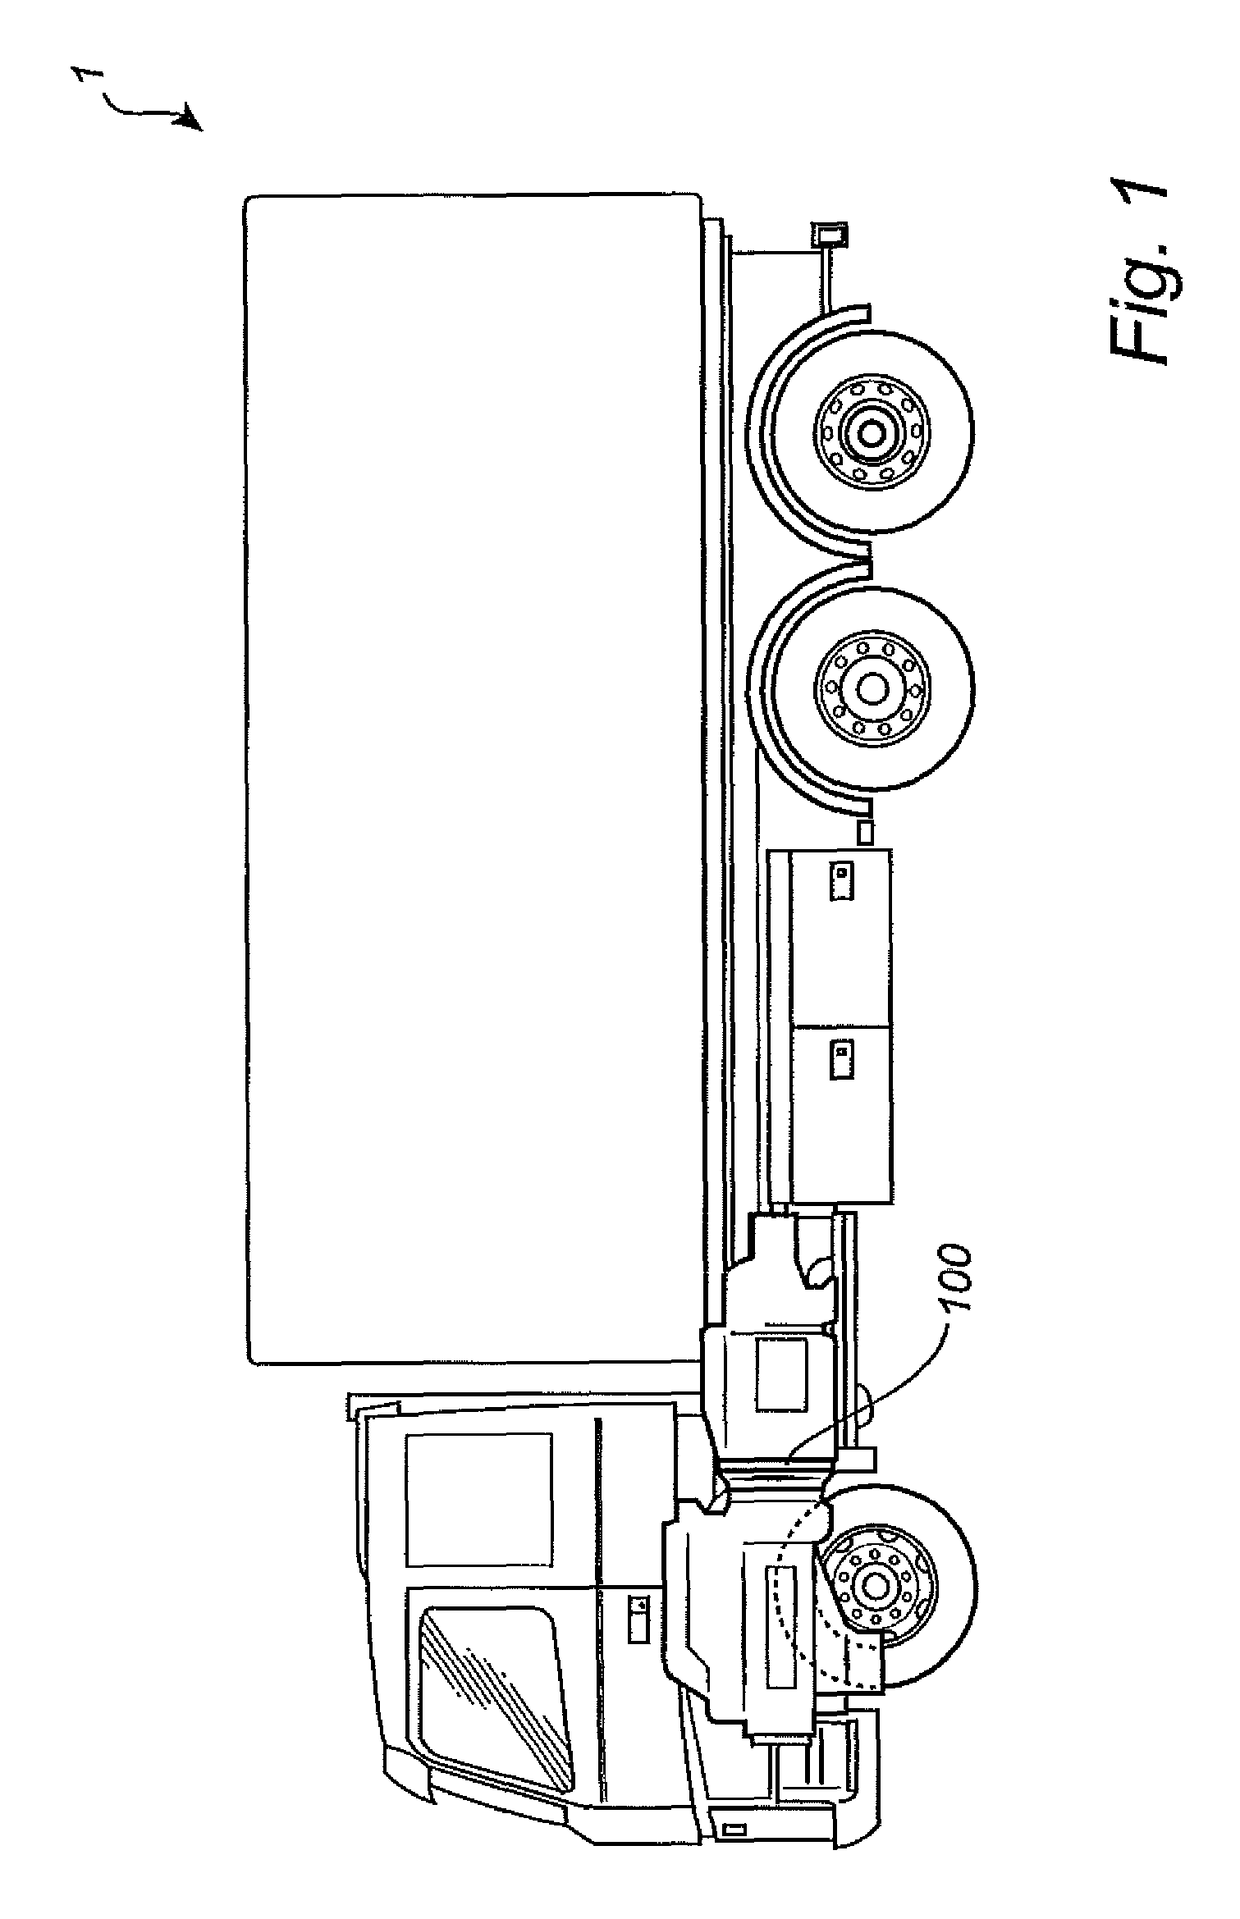 Method for controlling an actuator of a vehicle transmission